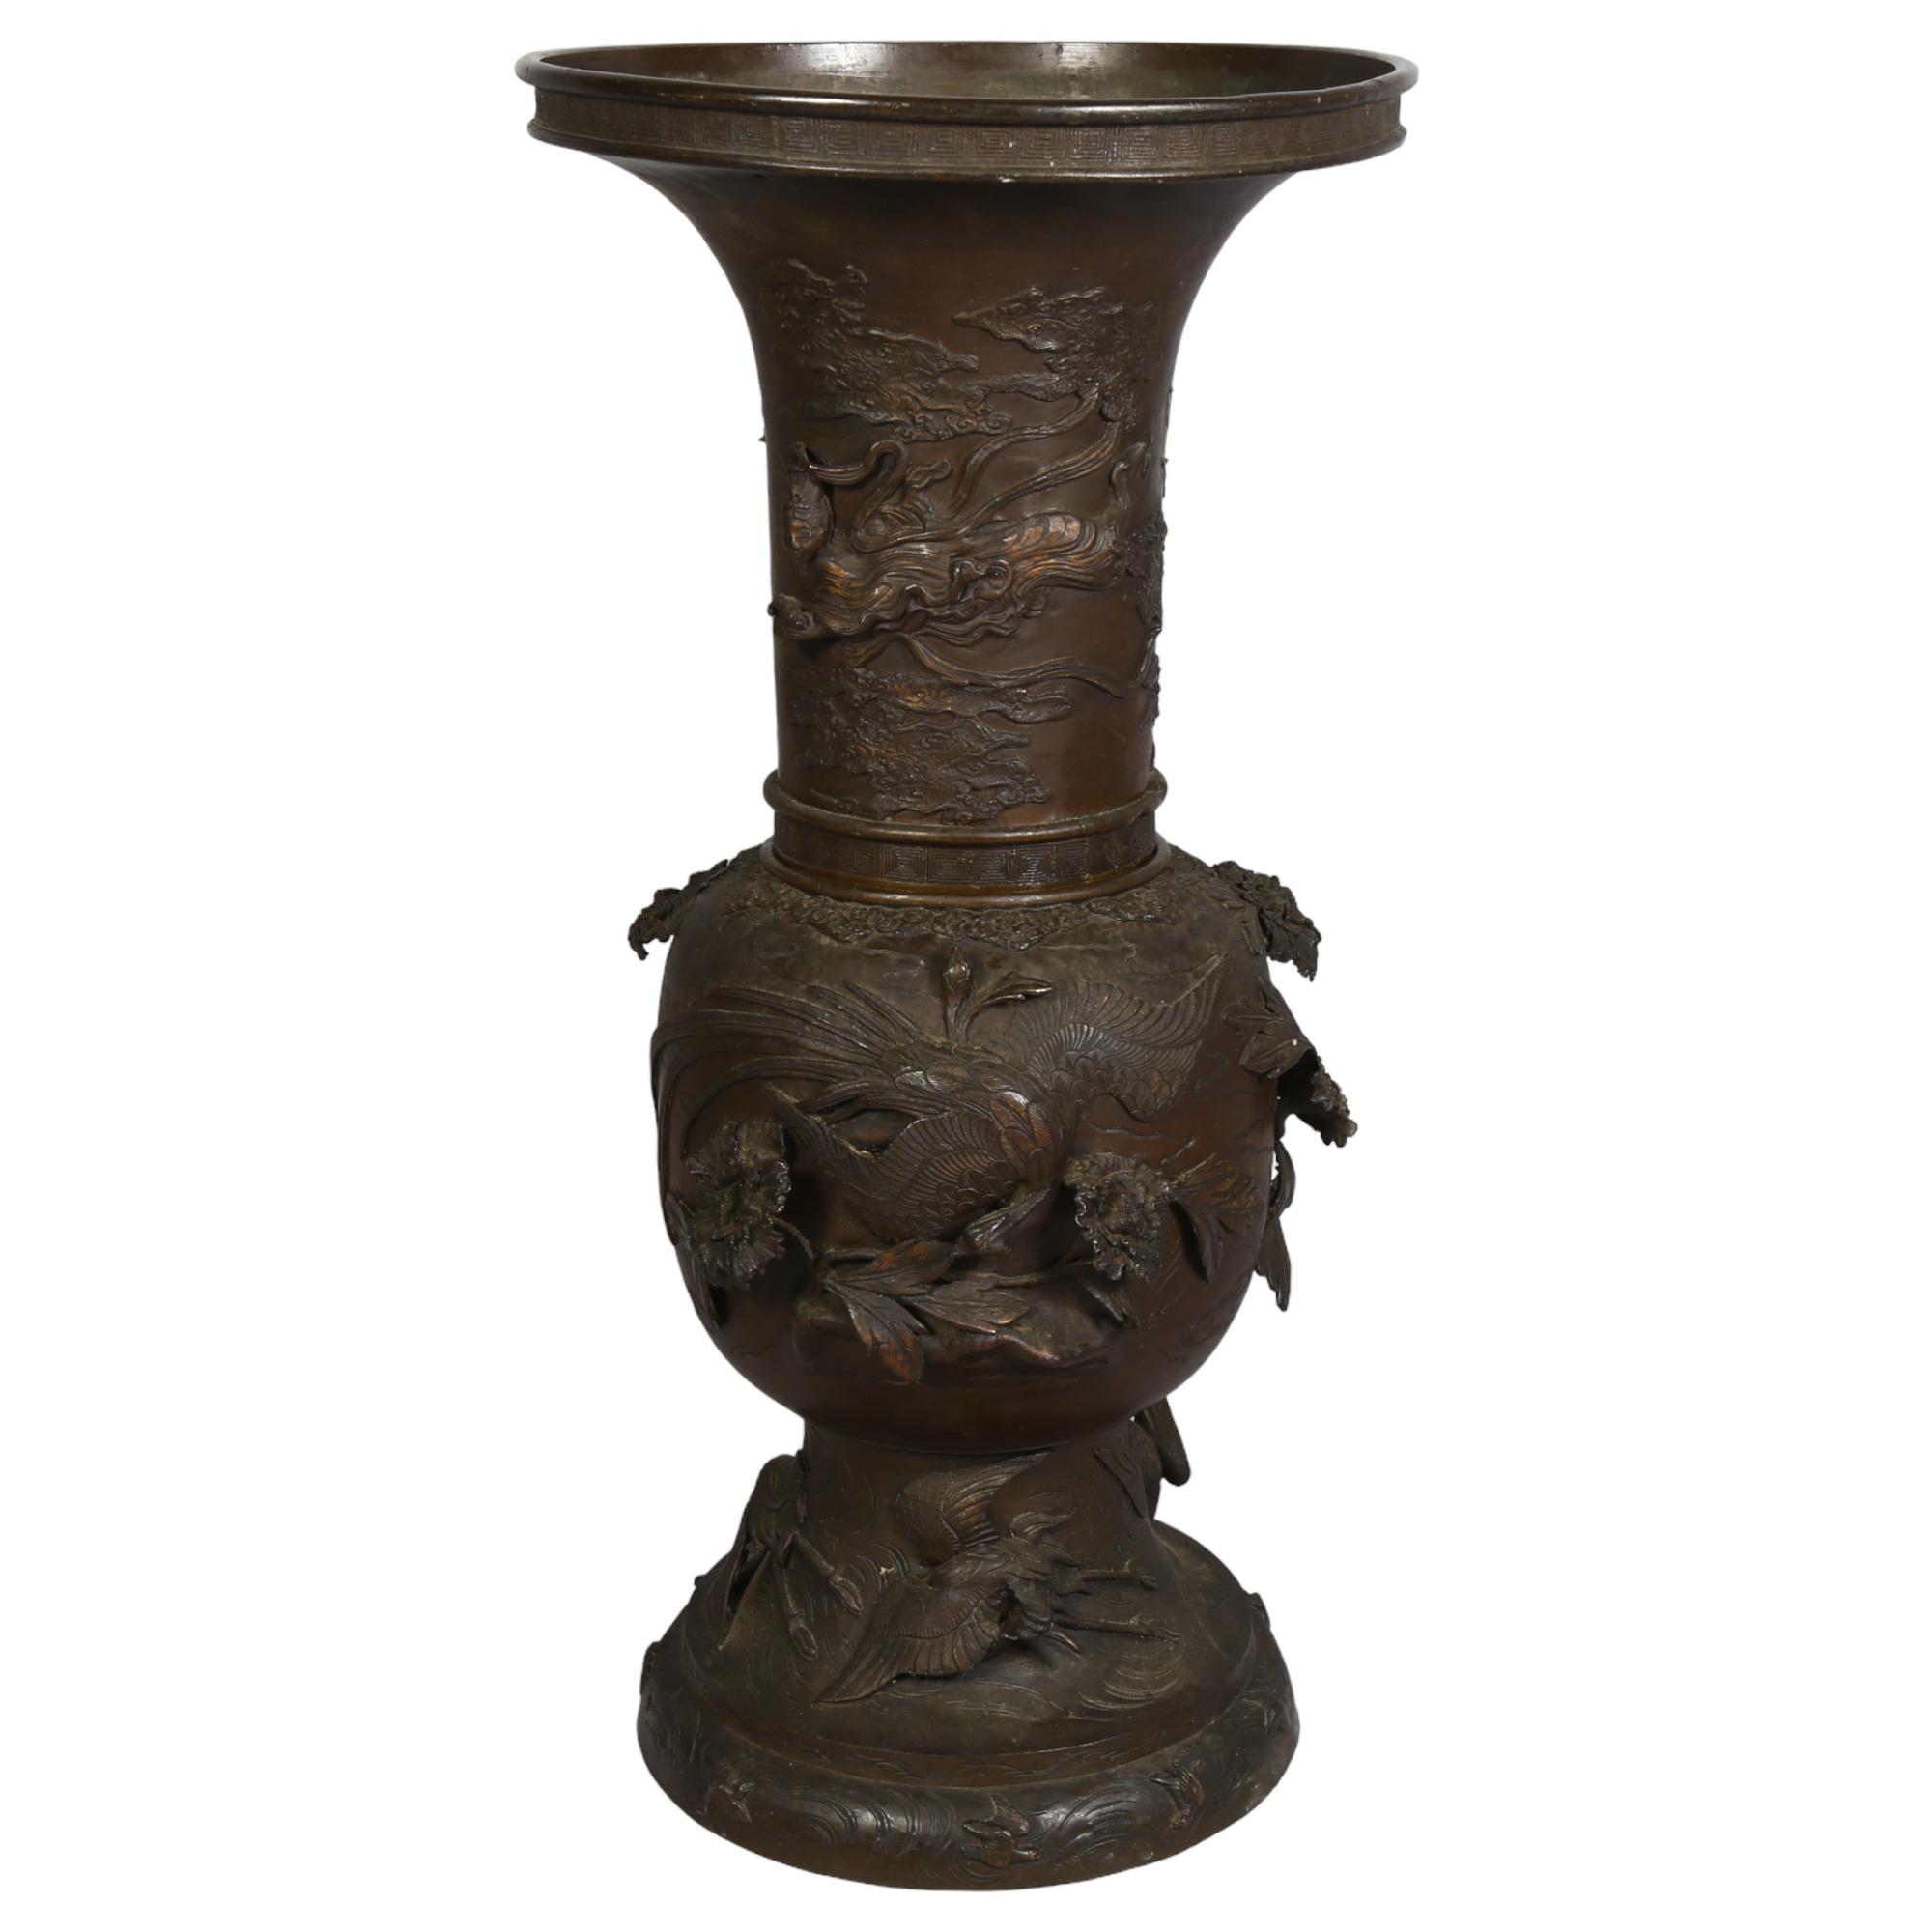 An Antique Chinese large cast-bronze vase in 2 sections, with birds and plants in high relief,